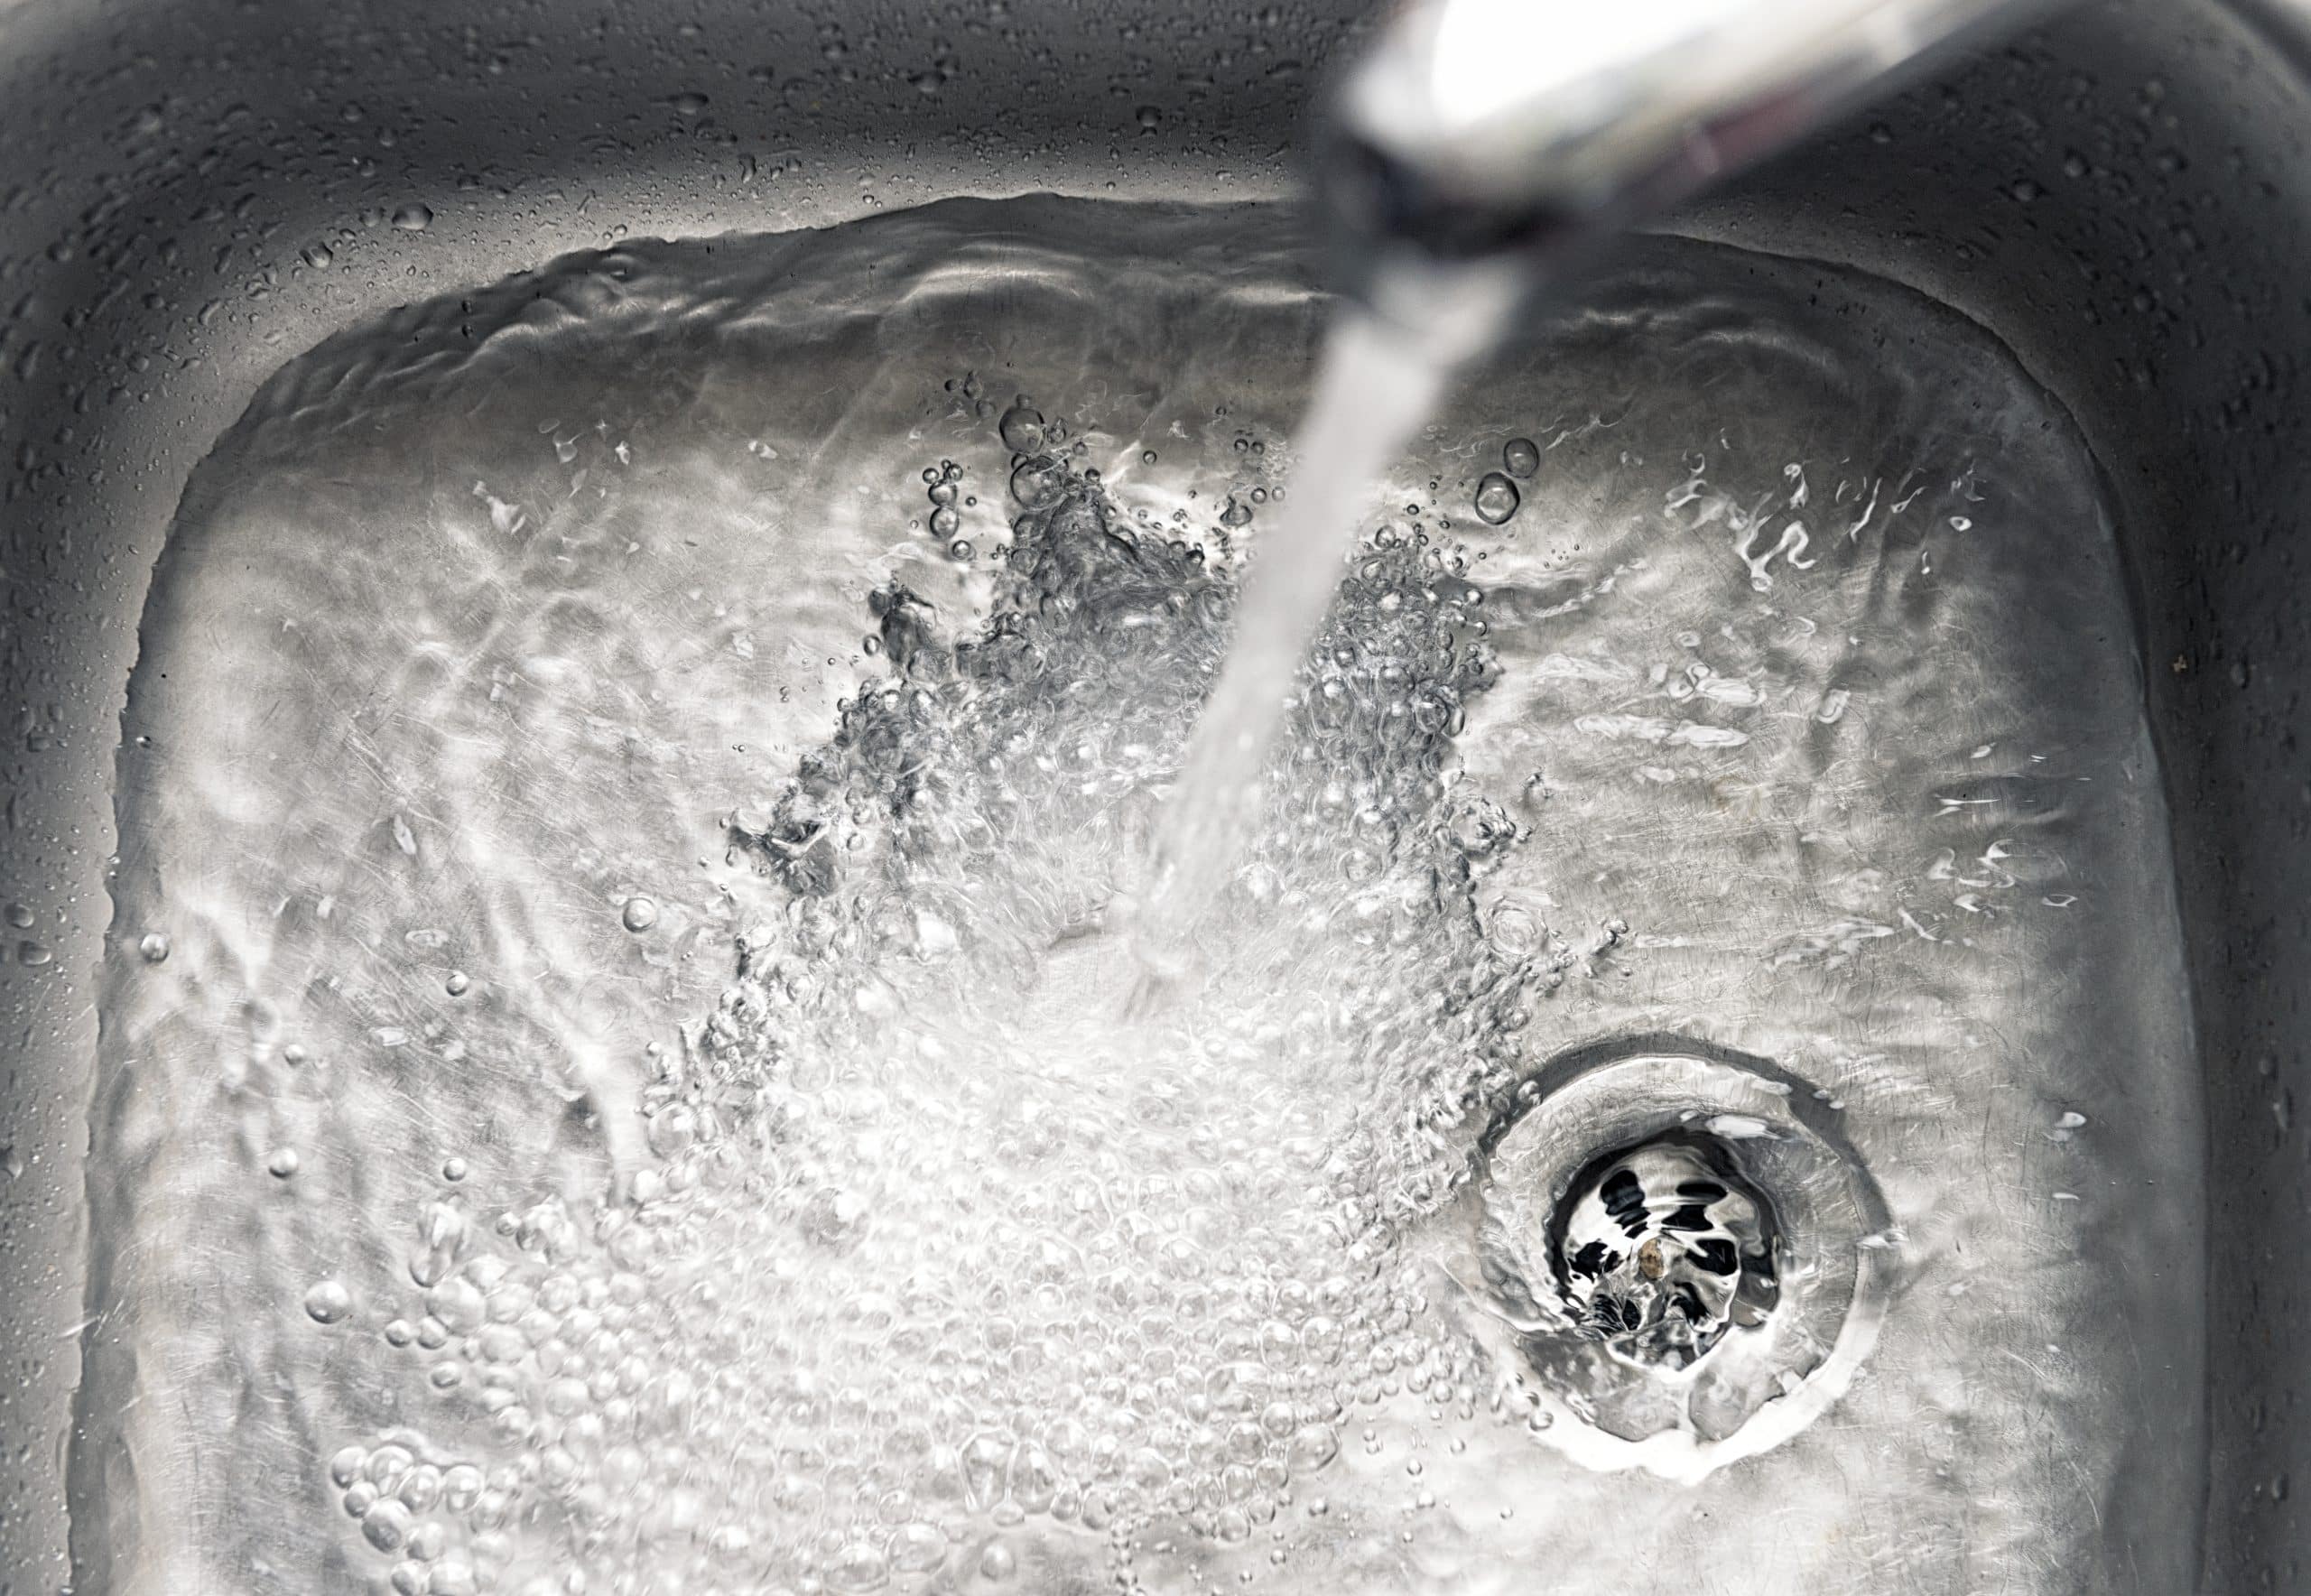 Tap water flowing into a stainless steel sink with a clogged drain